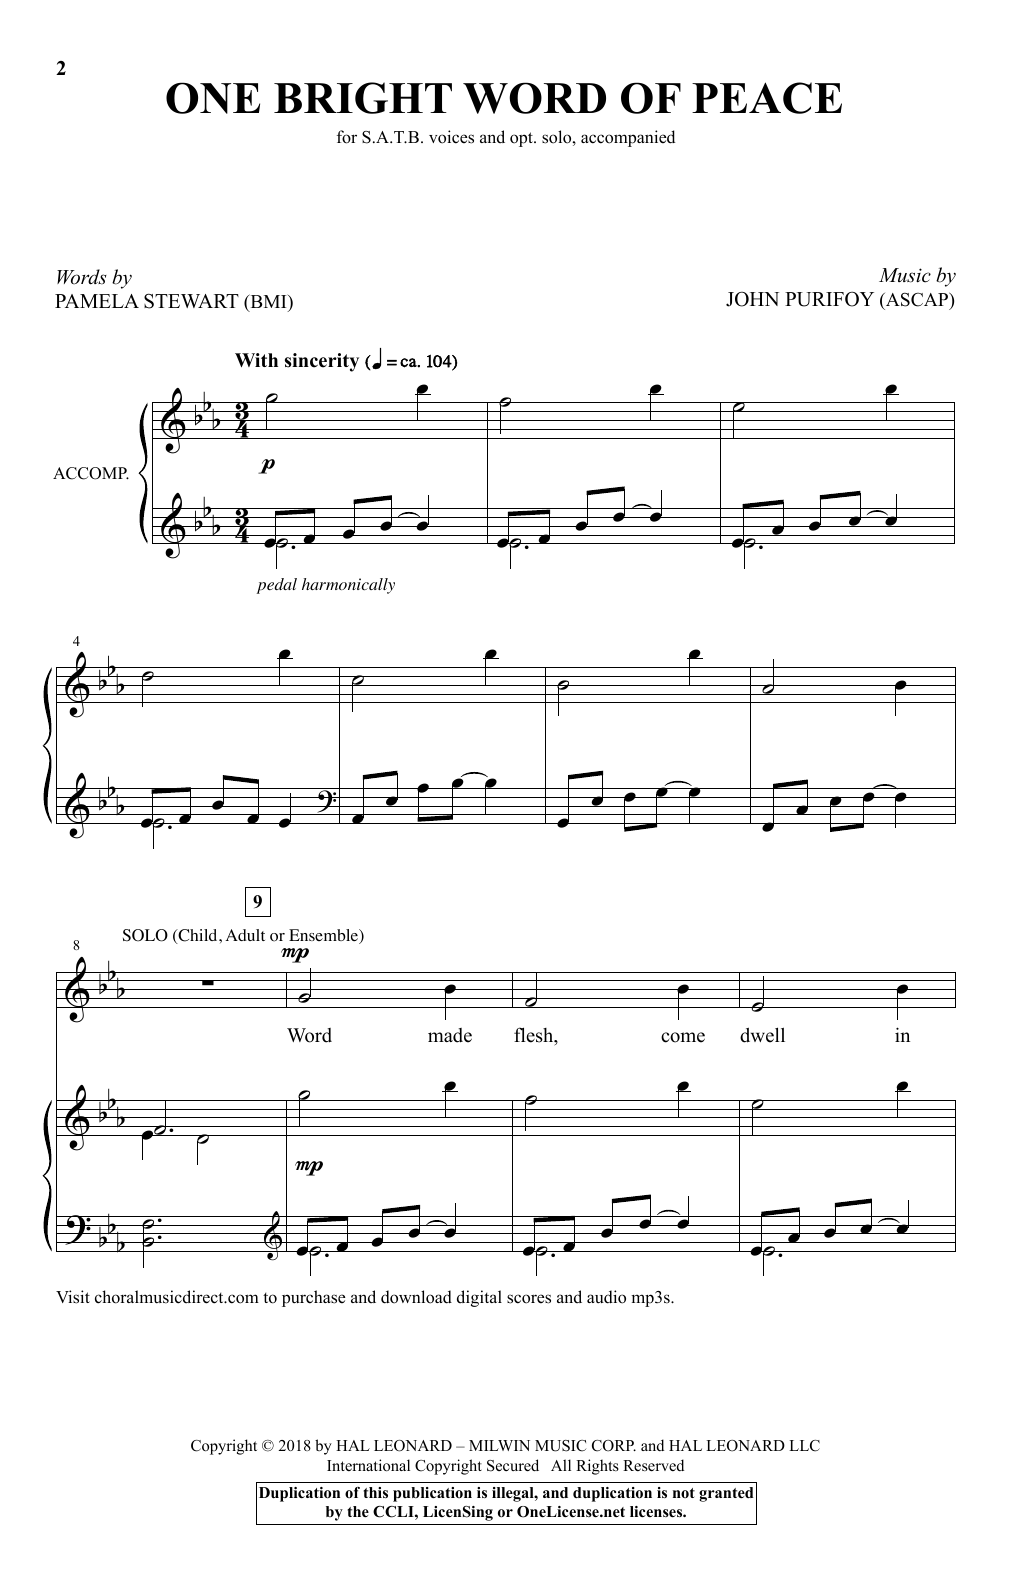 Download John Purifoy One Bright Word Of Peace Sheet Music